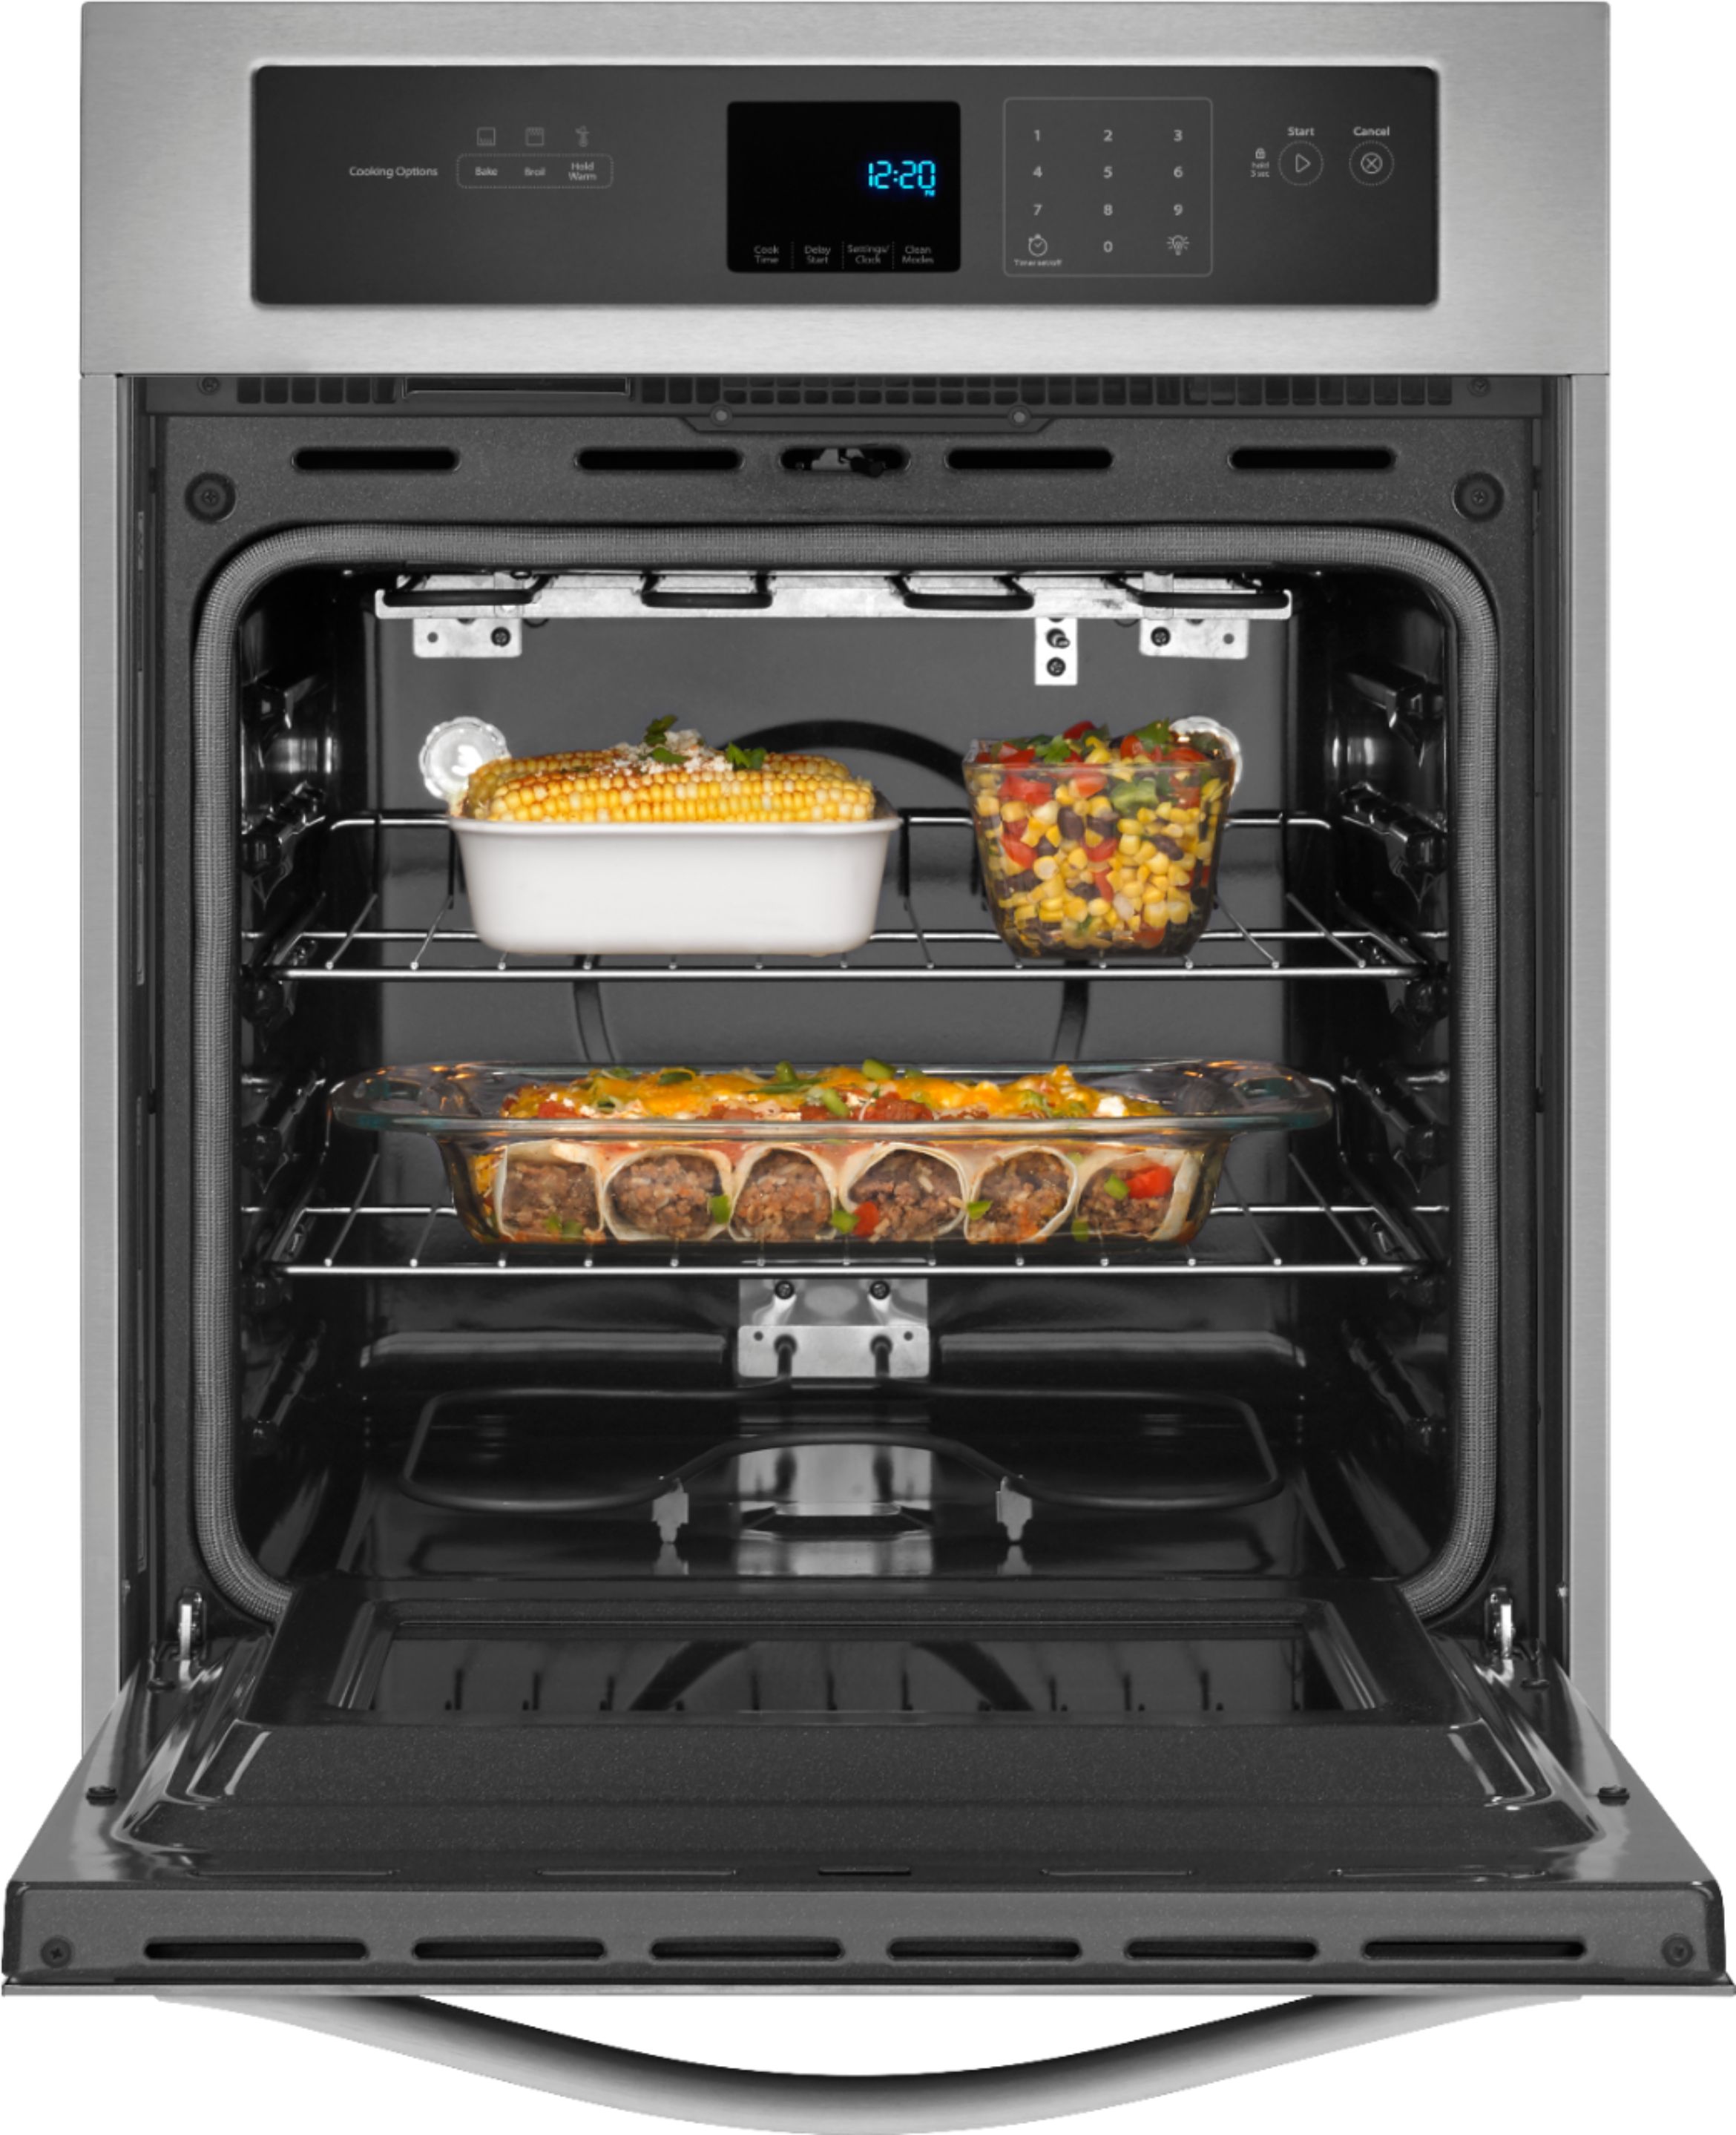 Whirlpool 24 Built-In Single Electric Wall Oven Stainless Steel